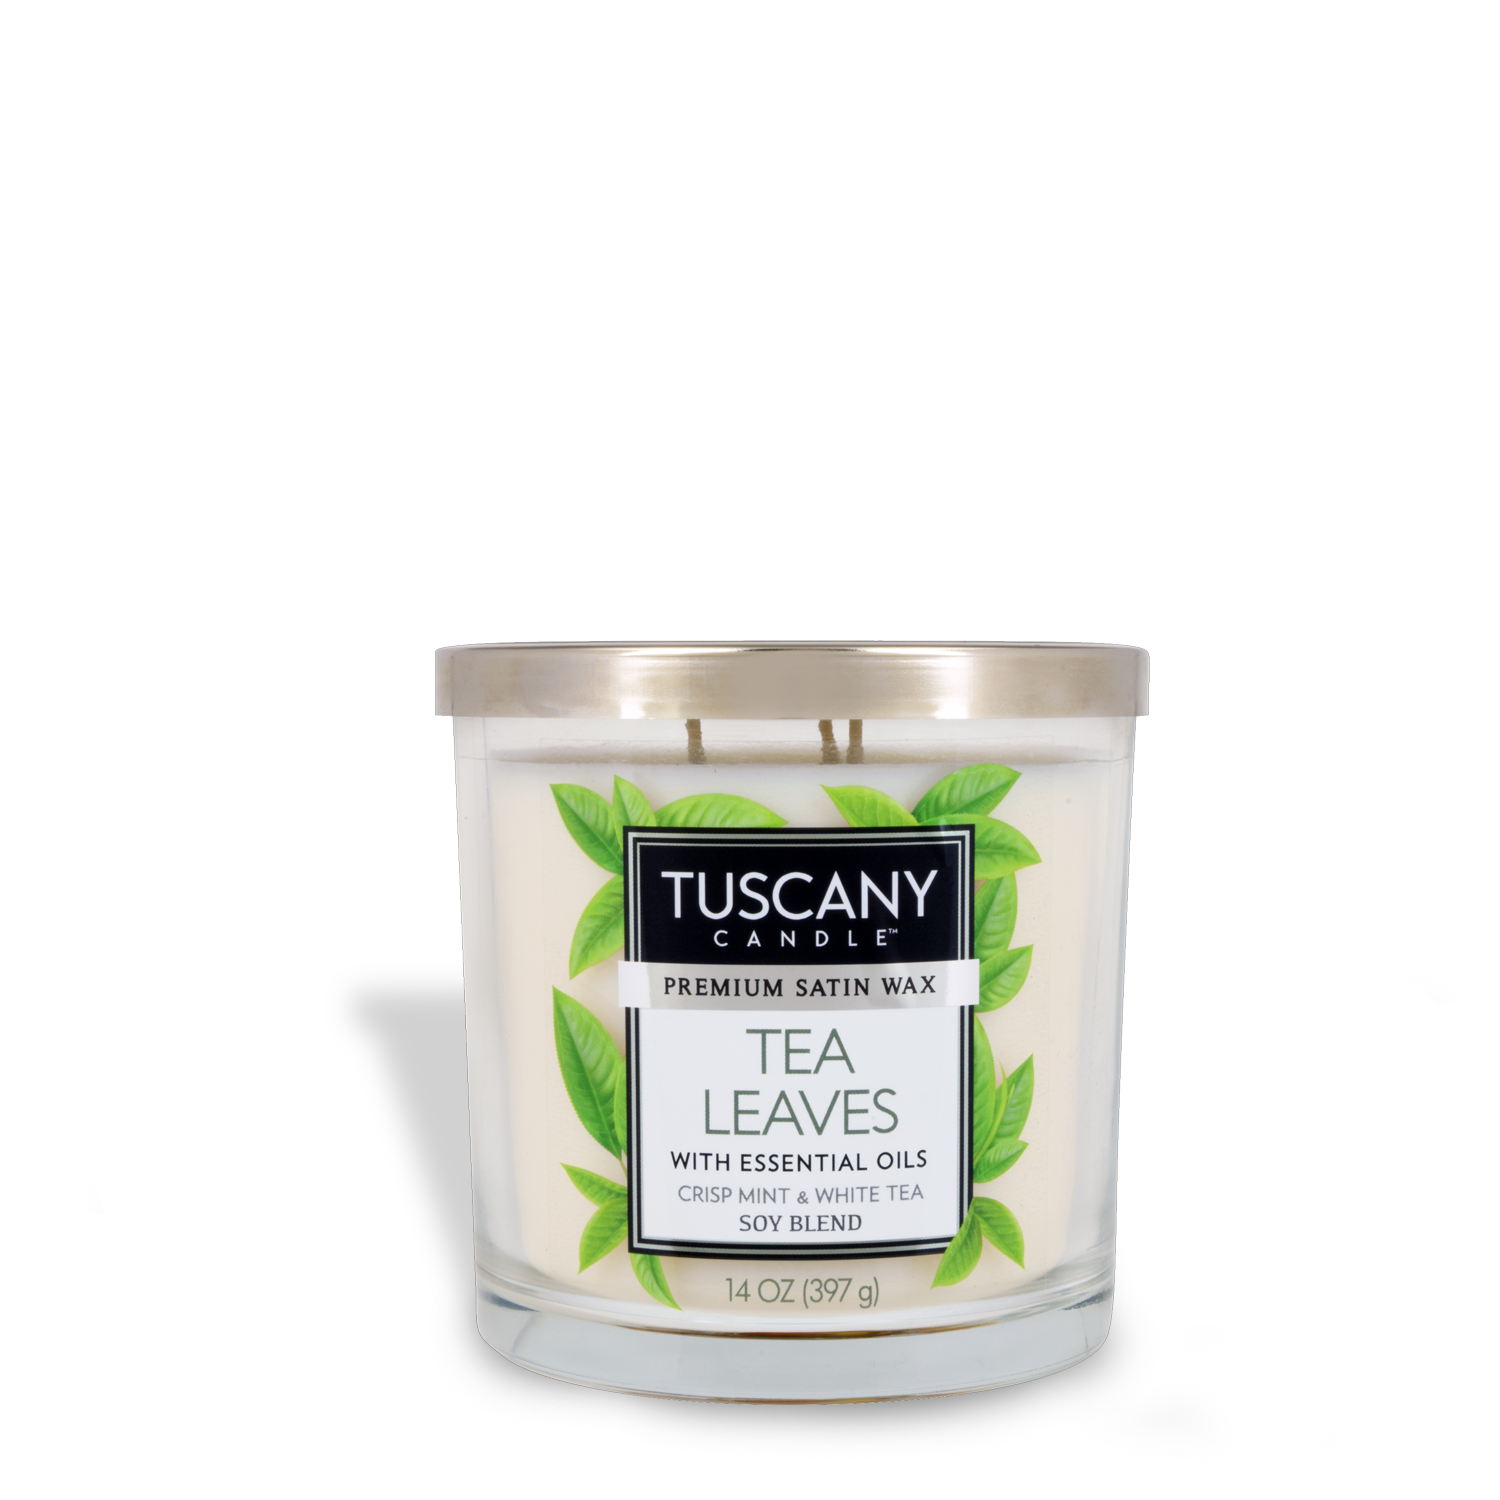 Crisp mint Tuscany Tea Leaves Long-Lasting Scented Jar Candle (14 oz) made with soy-blend wax.